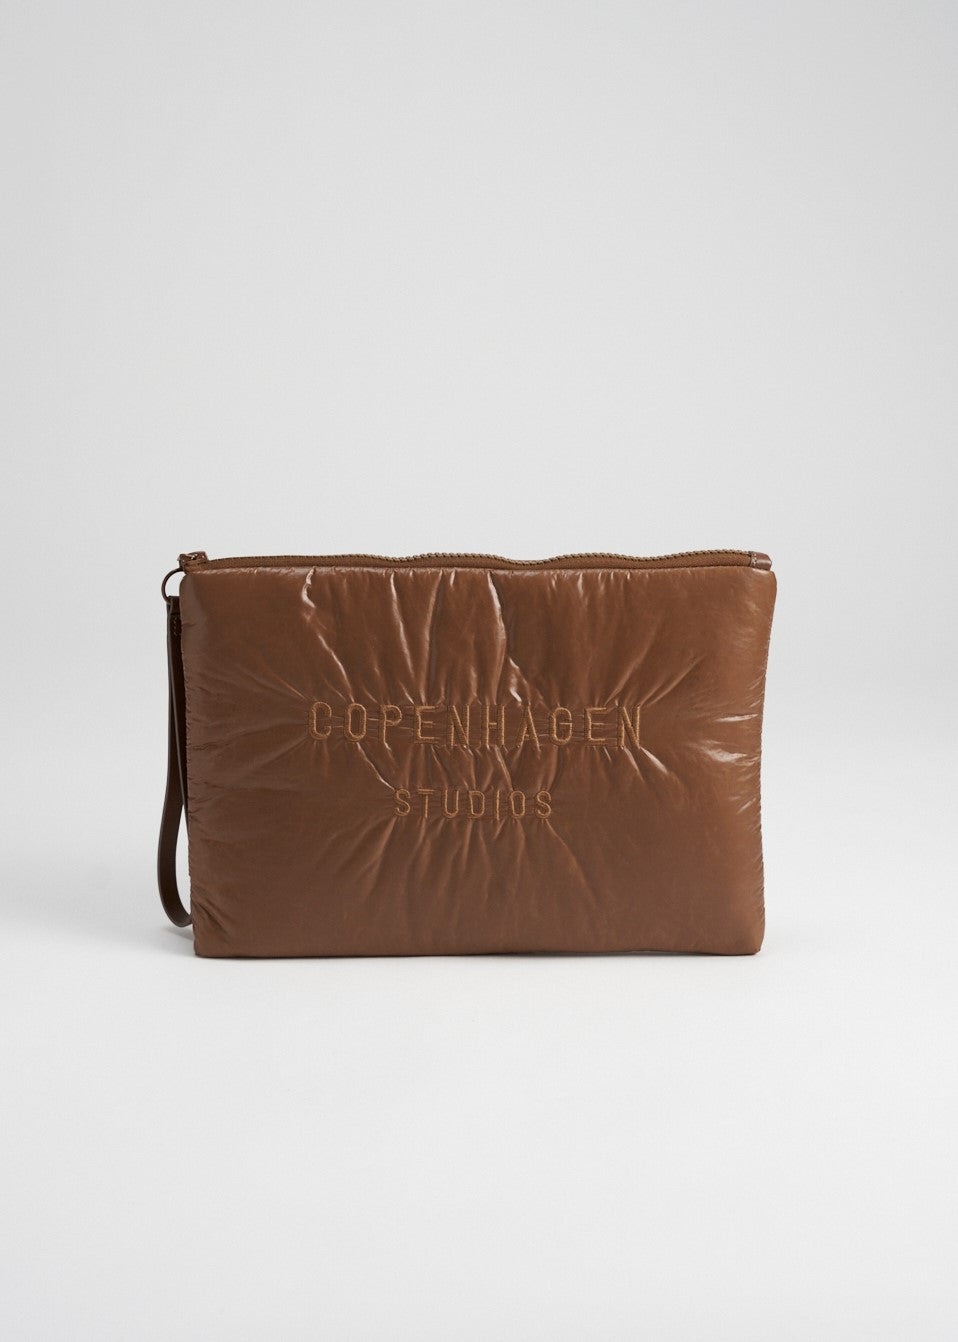 CPH POUCH 2 big recycled nylon nut brown